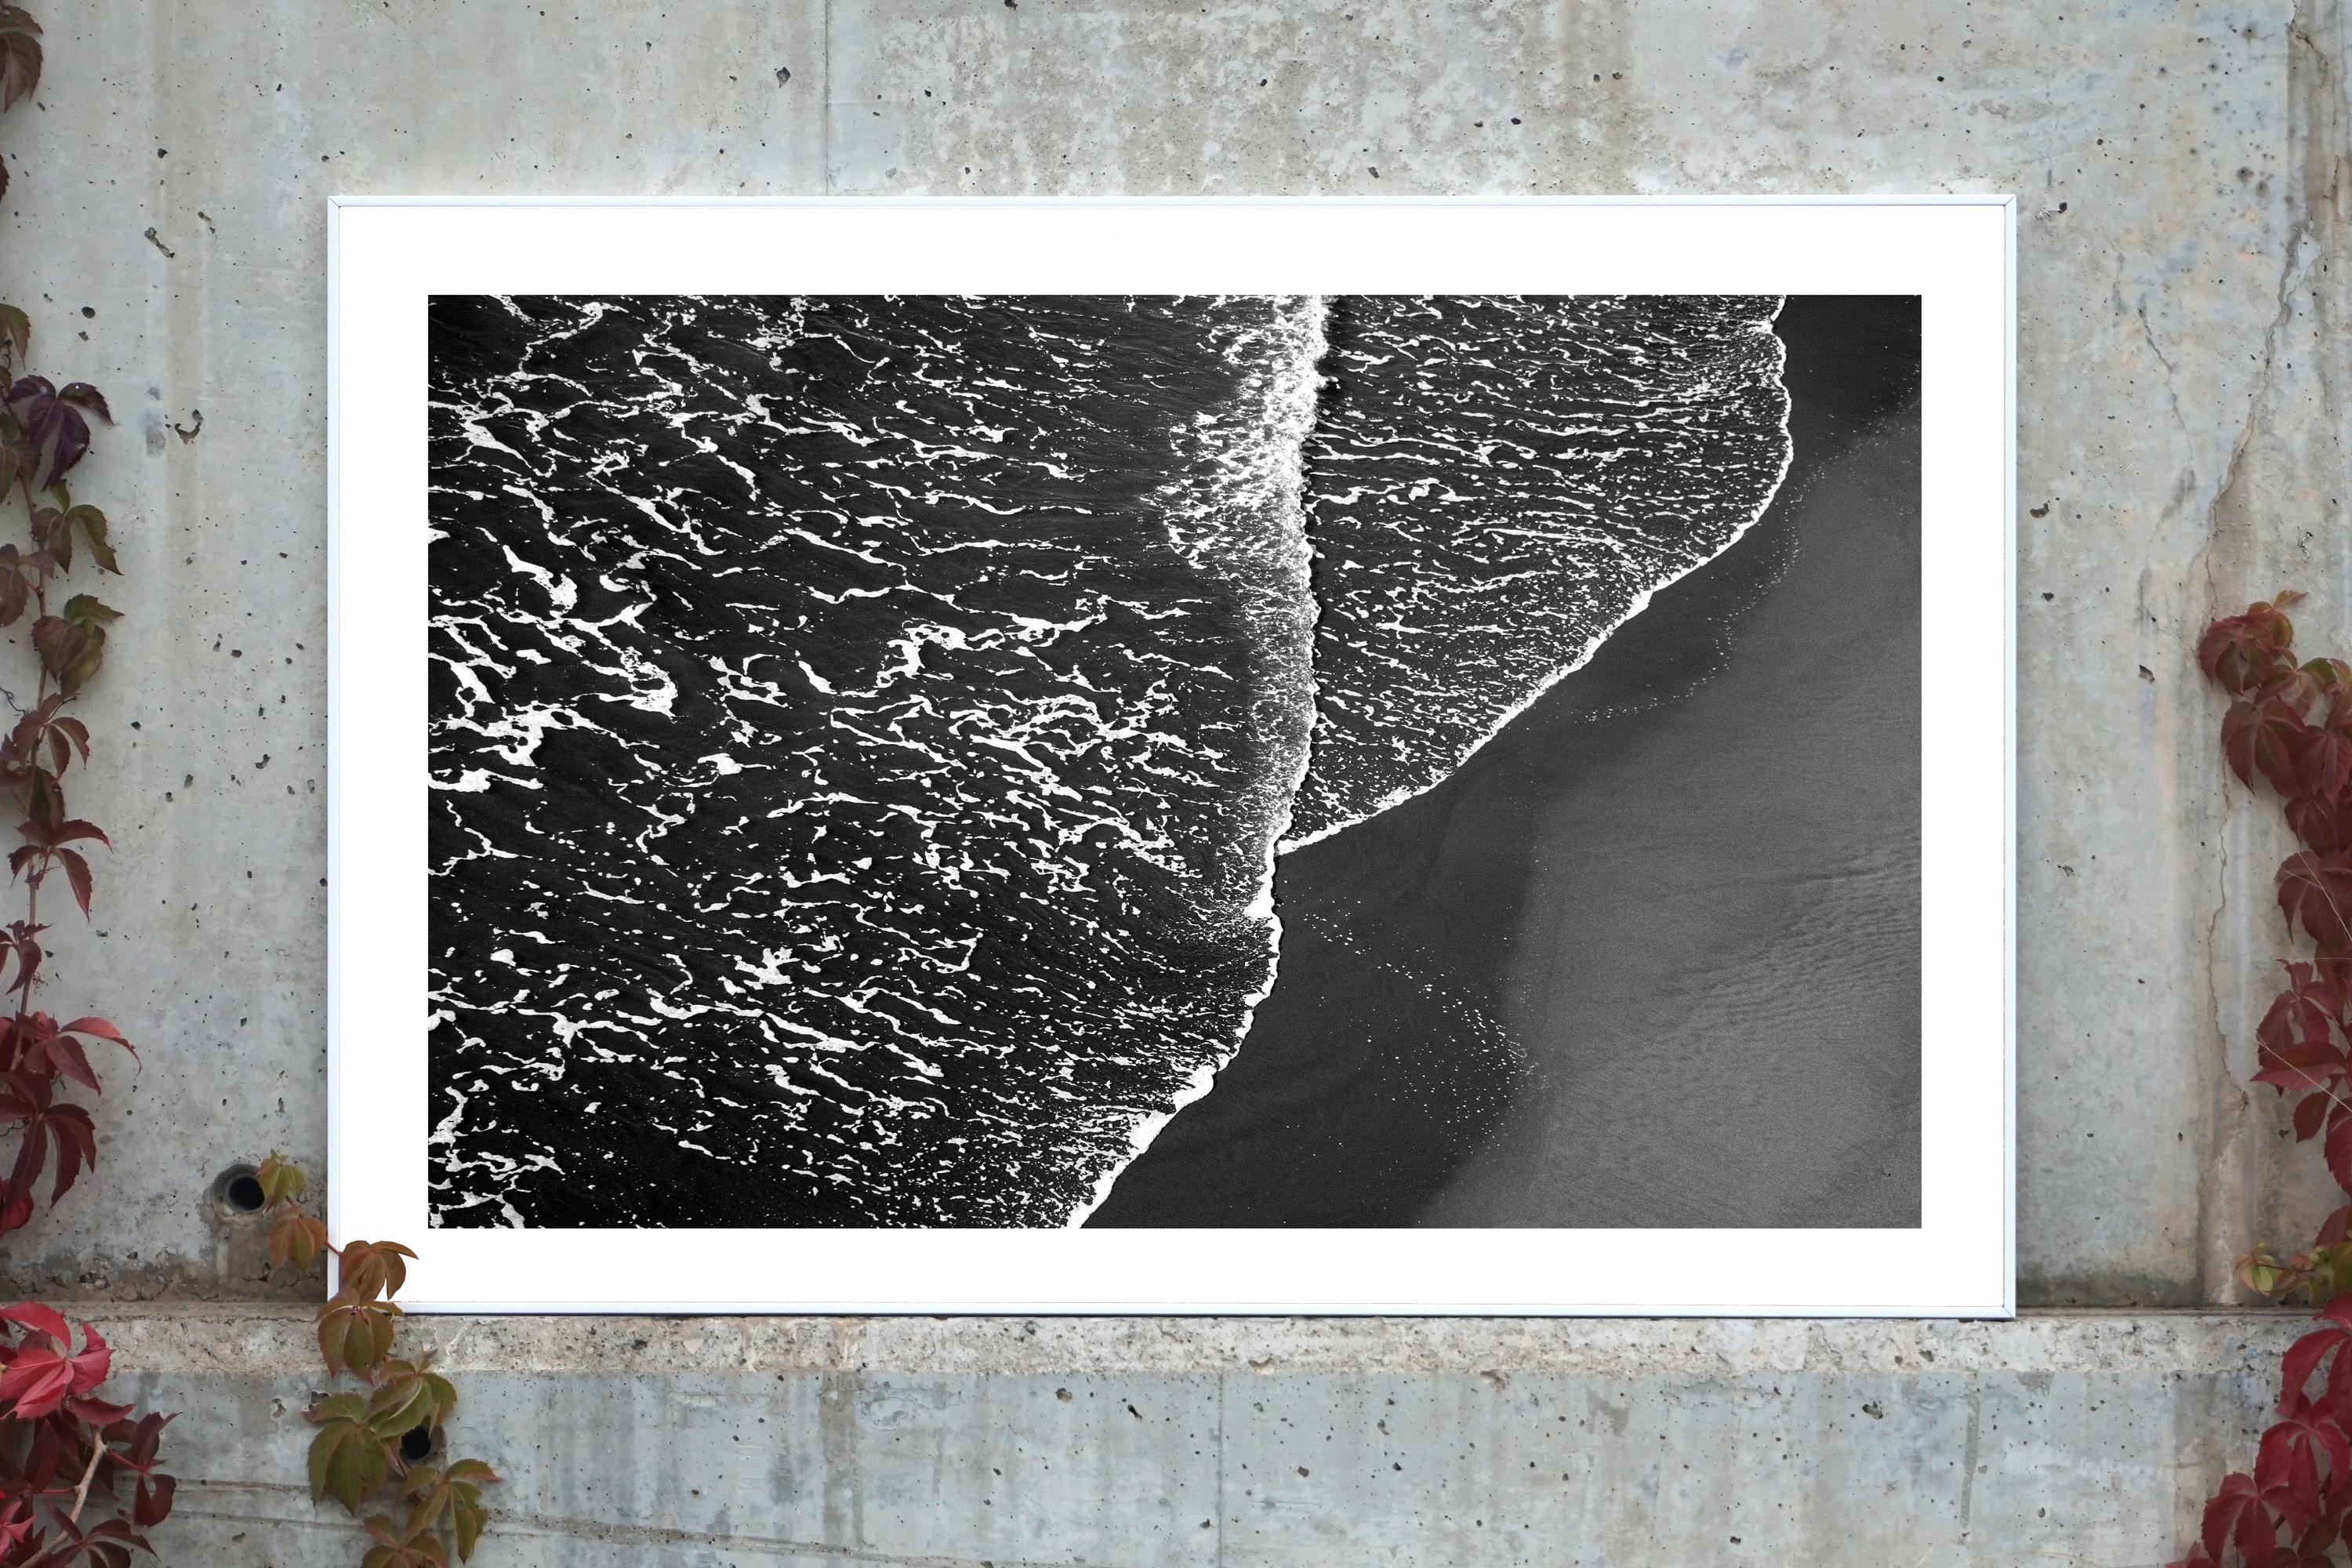 Pacific Foamy Shoreline, Black and White Seascape, Minimal Style Giclée, Classy - Photograph by Kind of Cyan